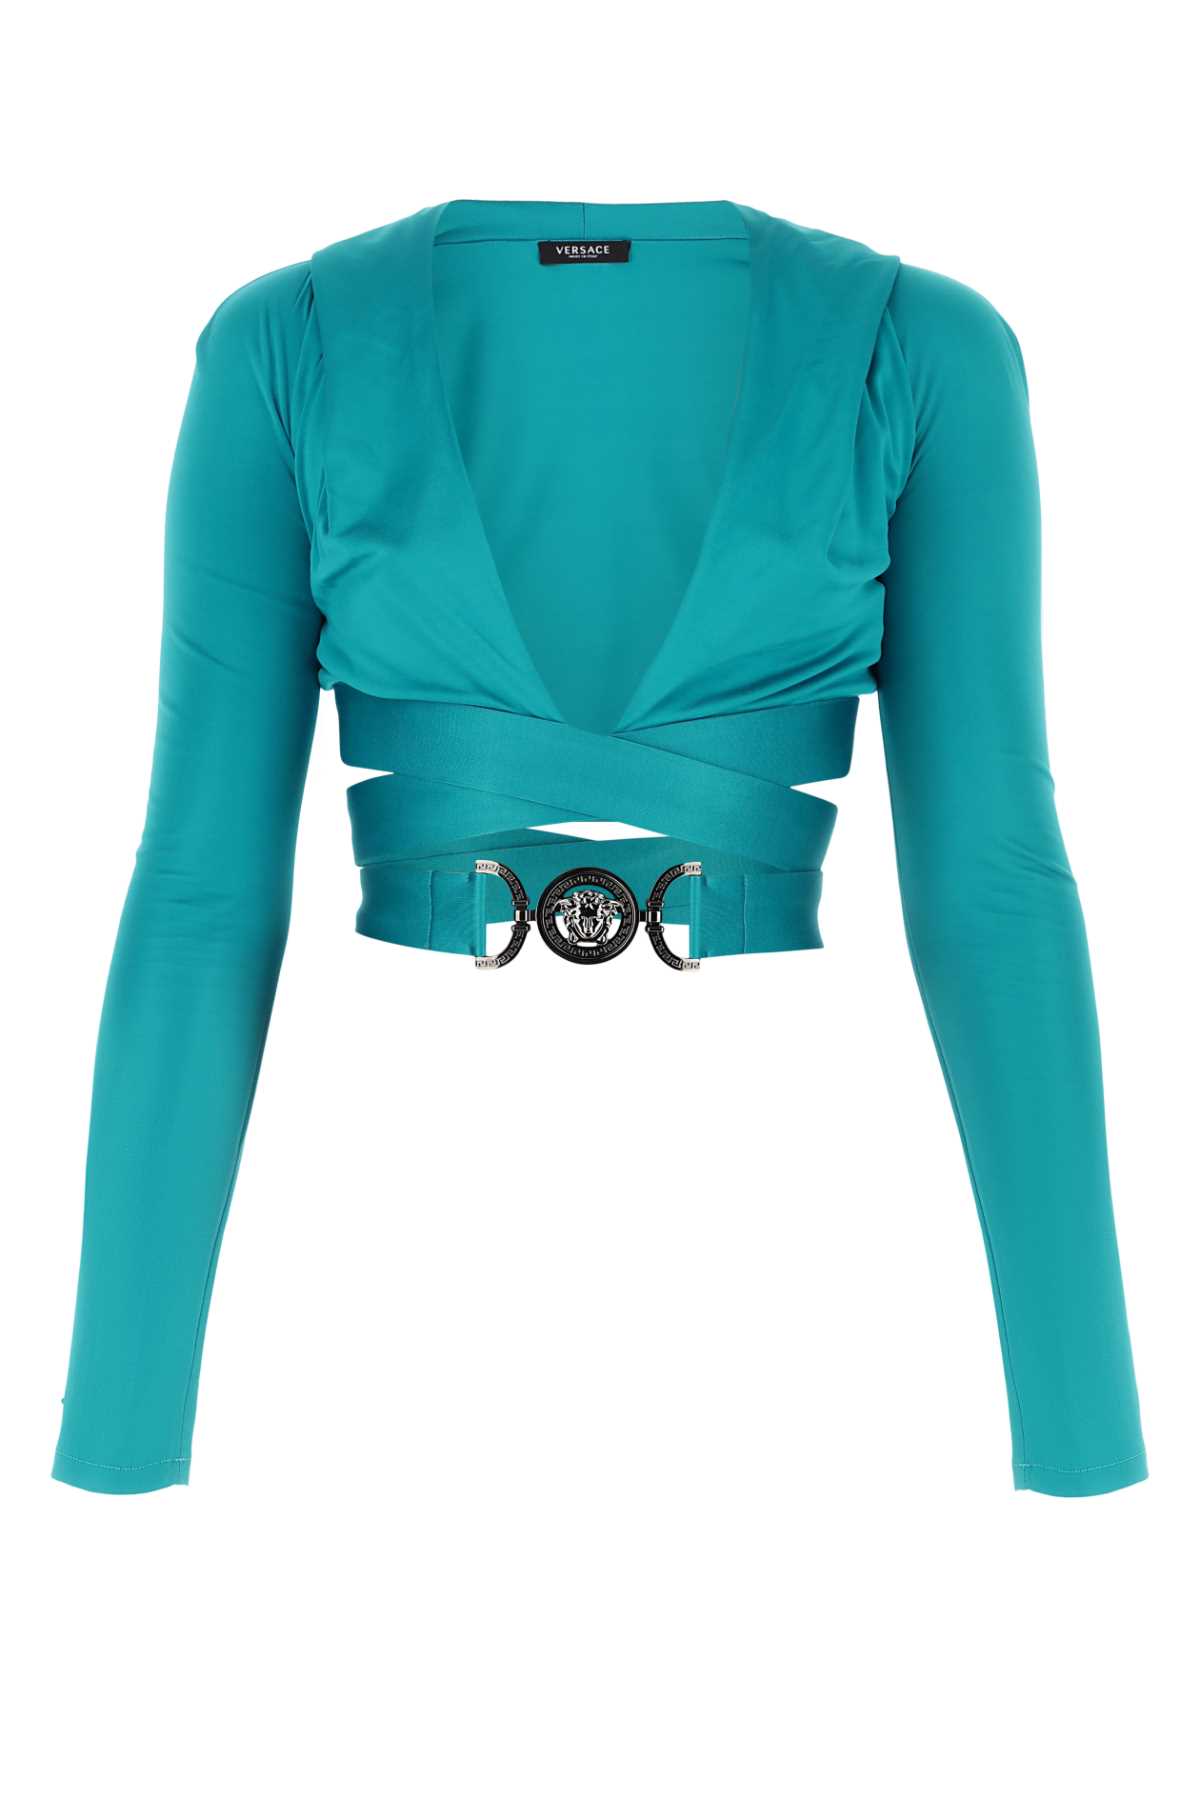 Shop Versace Teal Green Viscose Top In Turchese